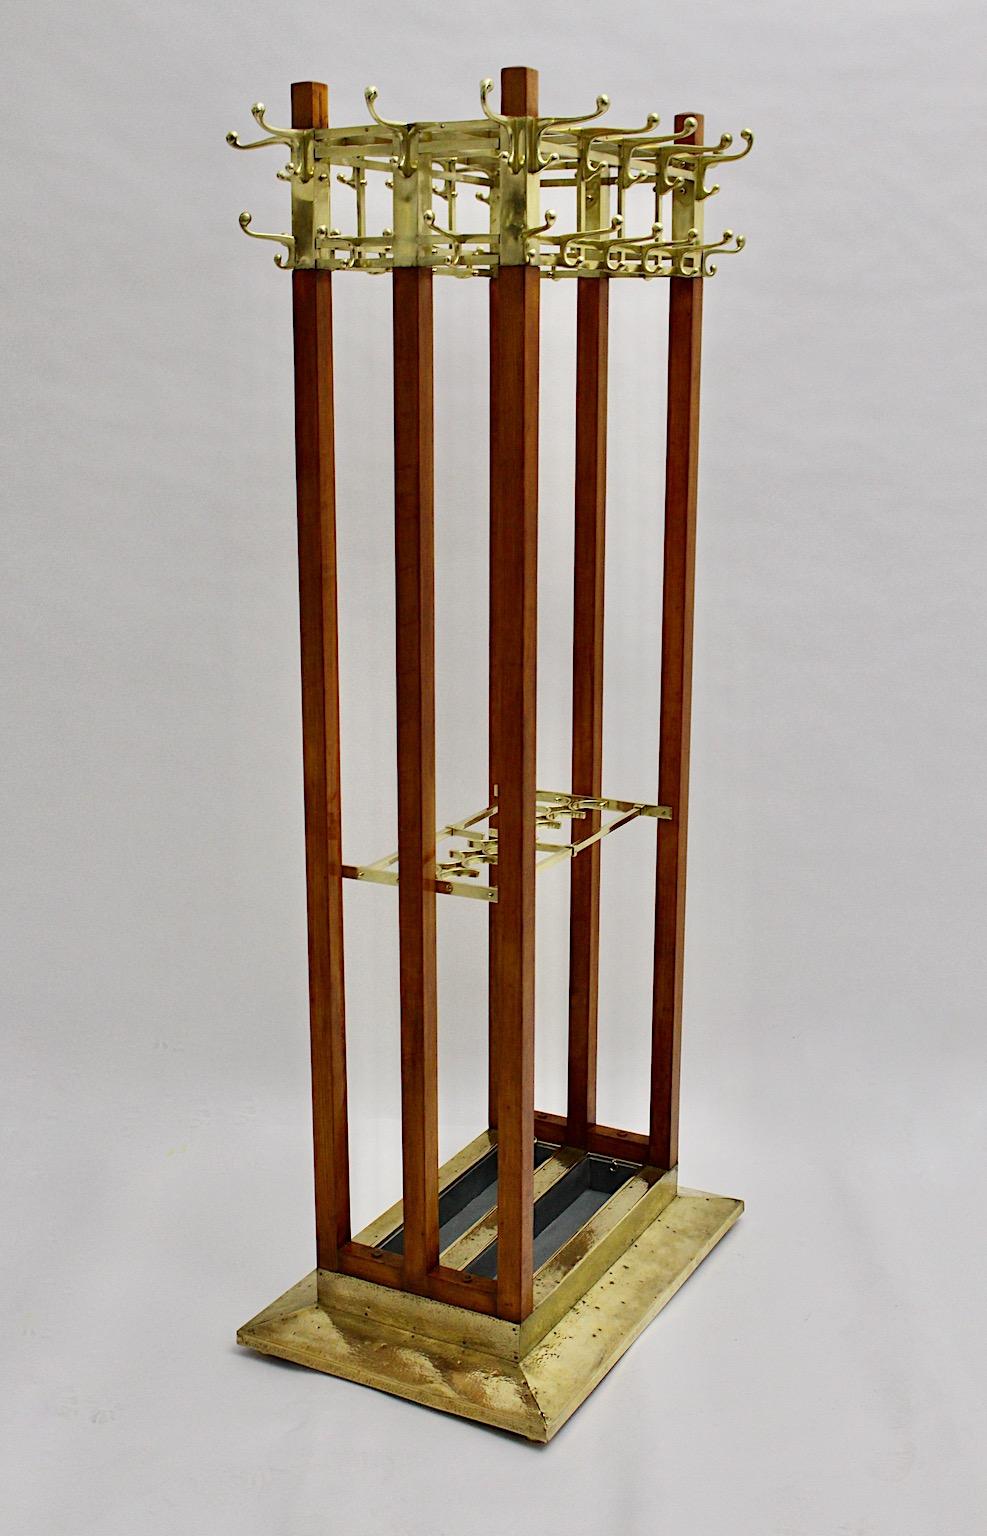 Jugendstil Freestanding Maple Wood Brass Coat Rack Coat Stand circa 1910 Austria In Good Condition For Sale In Vienna, AT